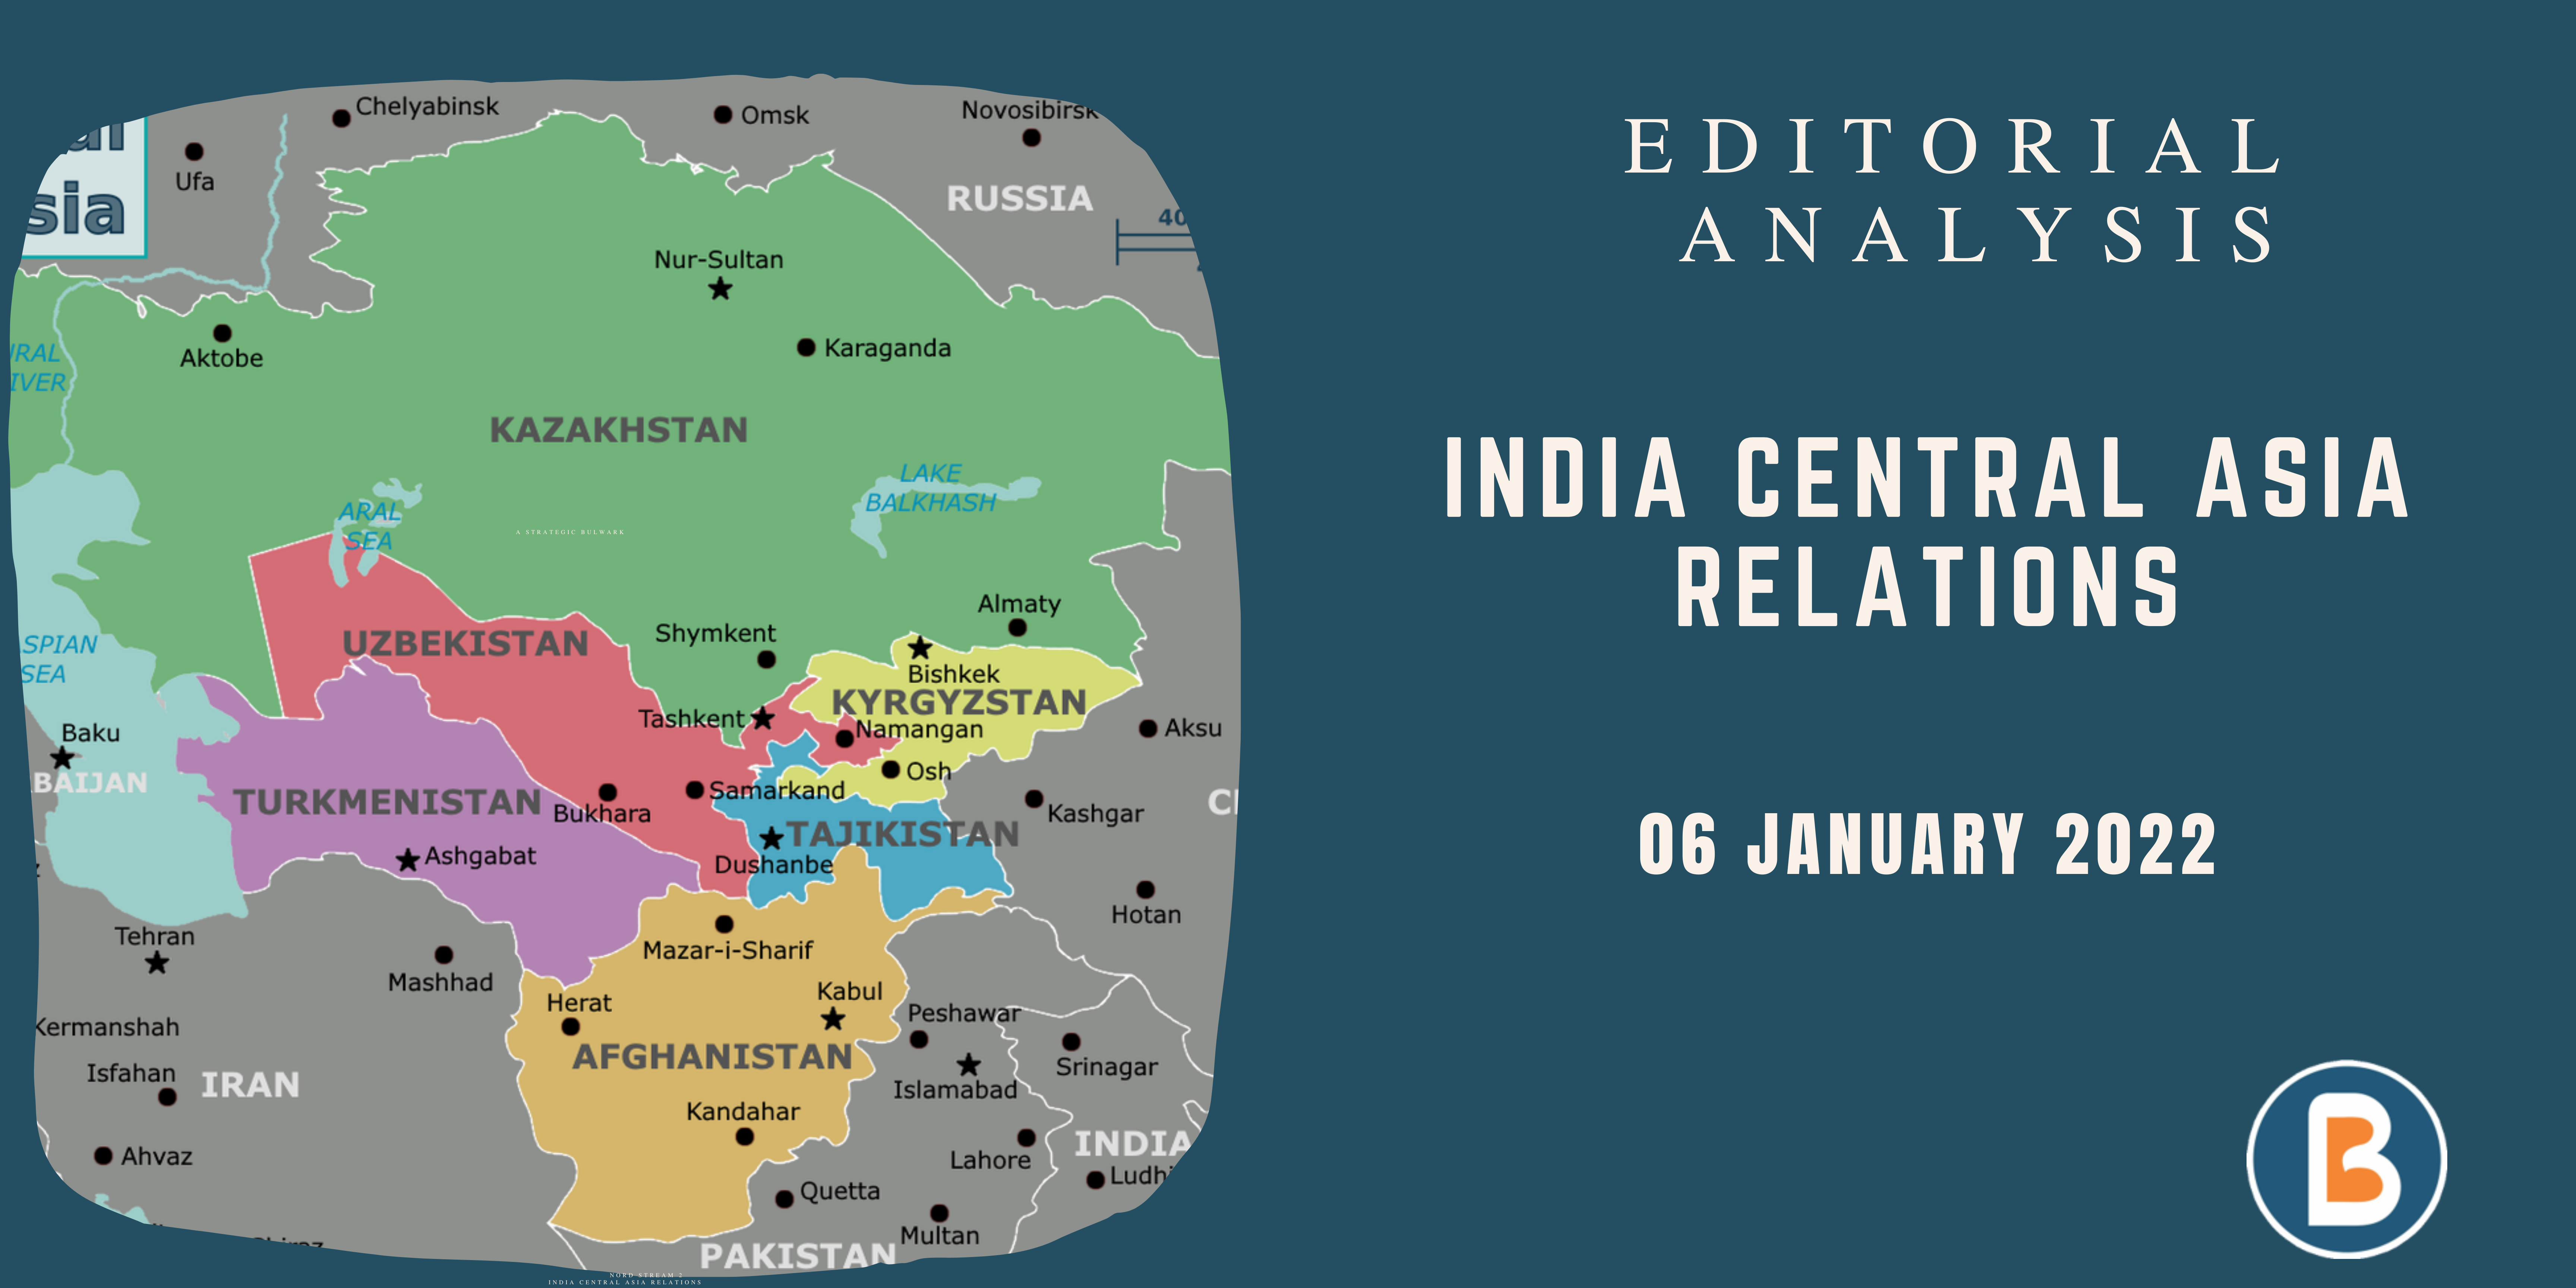 Editorial Analysis for IAS - India Central Asia Relations